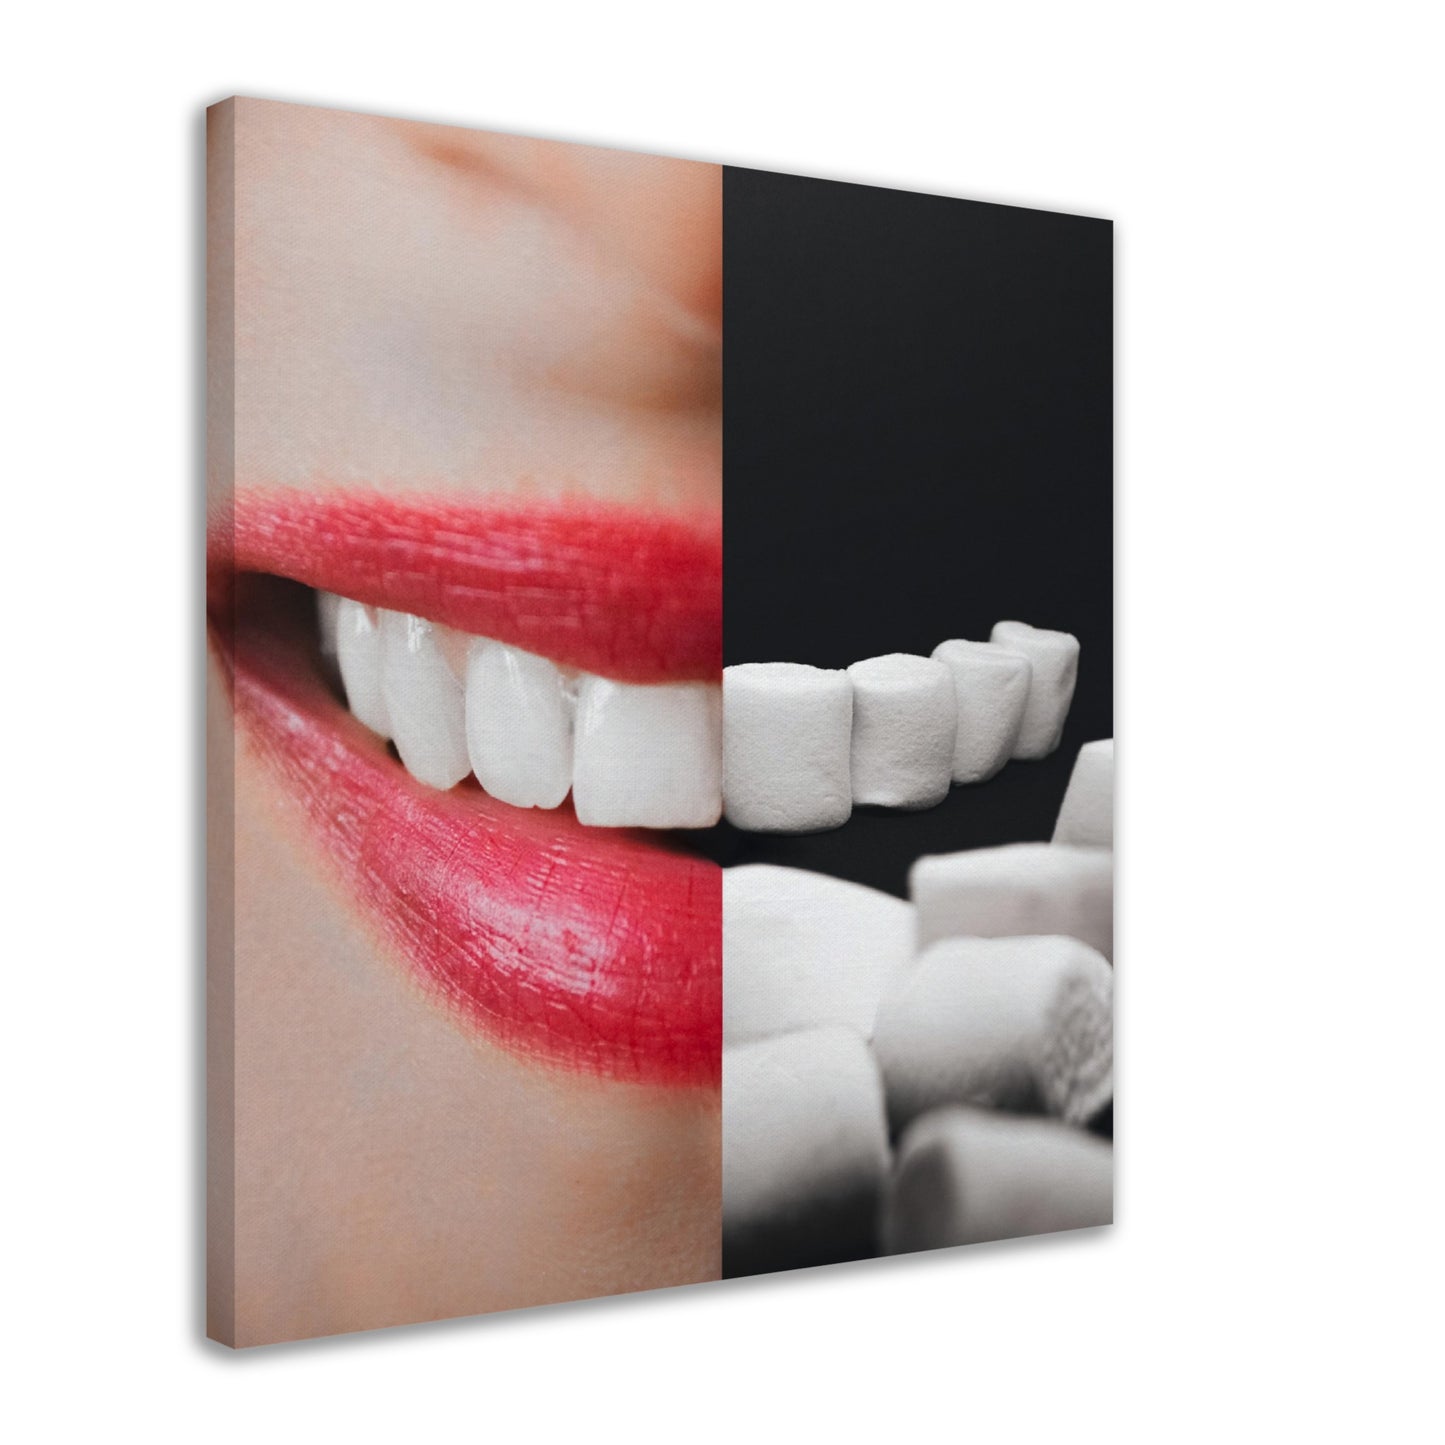 Sweet Tooth #2 - Canvas Print